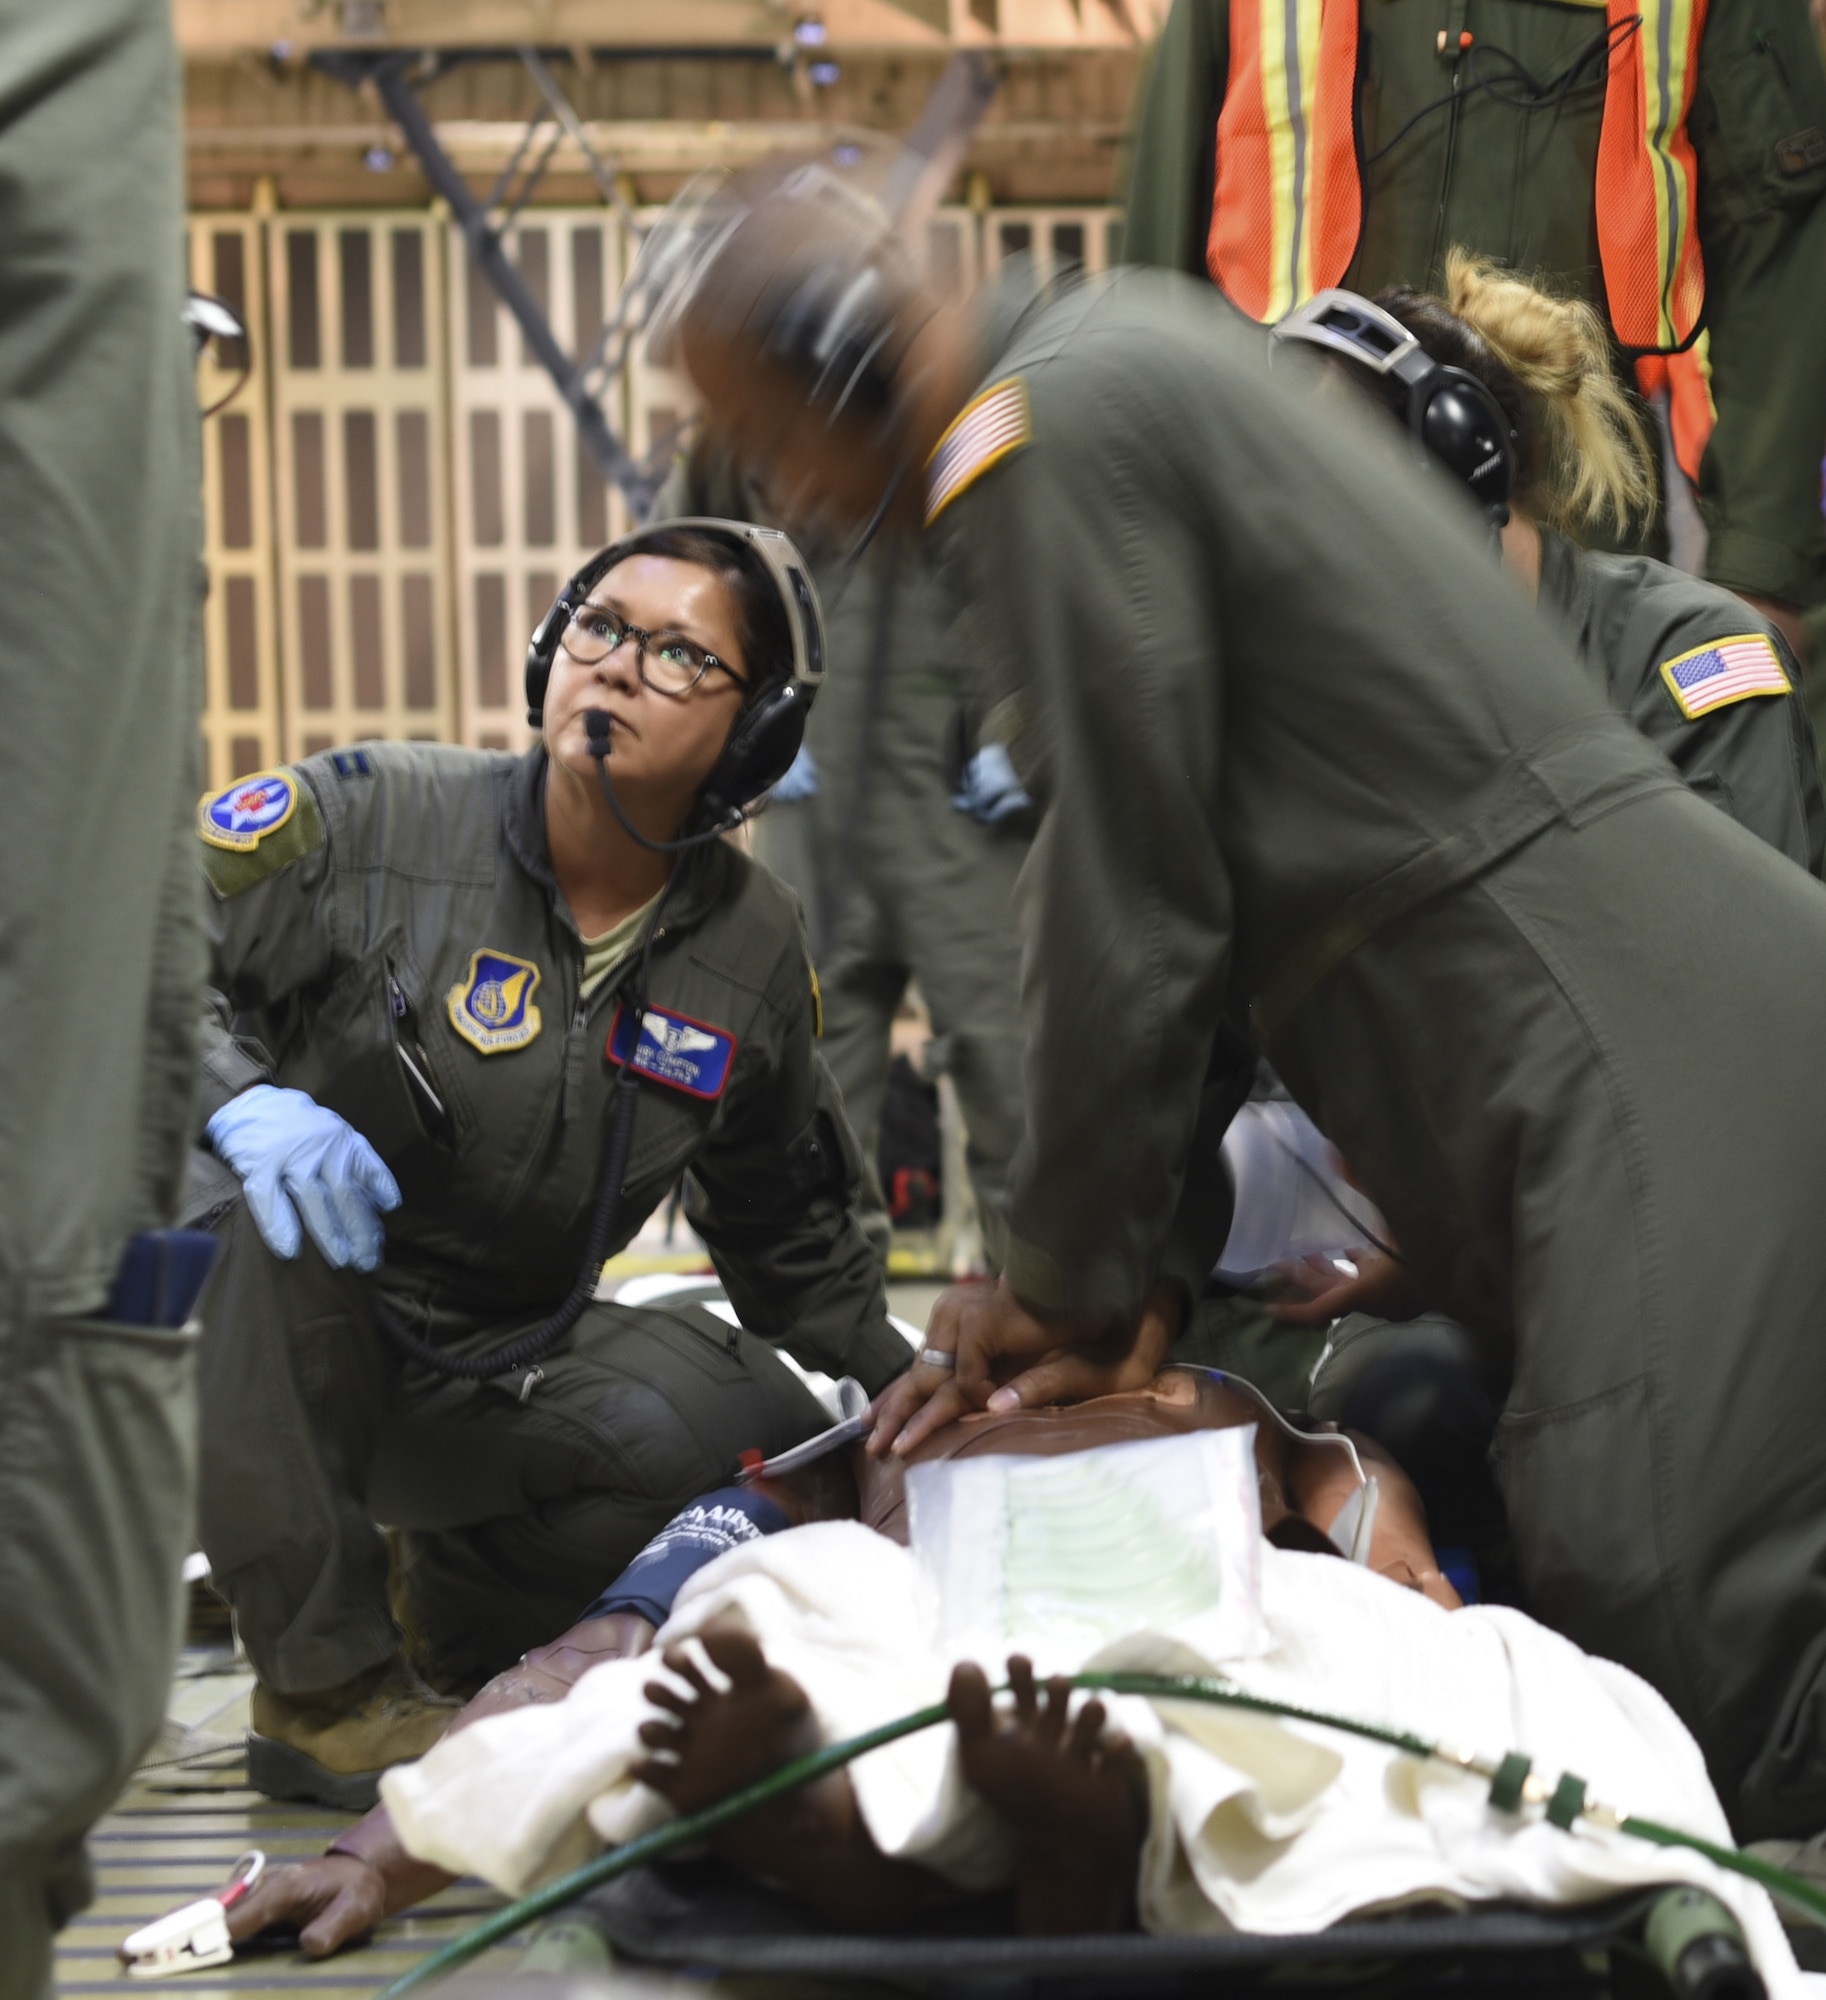 U.S. Air Force Staff Sgt. Jamal Wardlaw, 59th Medical Wing cardio pulmonary technician, center, performs cardio pulmonary resuscitation on a simulated patient during Exercise Ultimate Caduceus 2018 at Travis Air Force Base, California, Aug. 23, 2018. Ultimate Caduceus 2018 is an annual patient movement exercise designed to test the ability of U.S. Transportation Command to provide medical evacuation. (U.S. Air Force photo by Staff Sgt. Amber Carter)